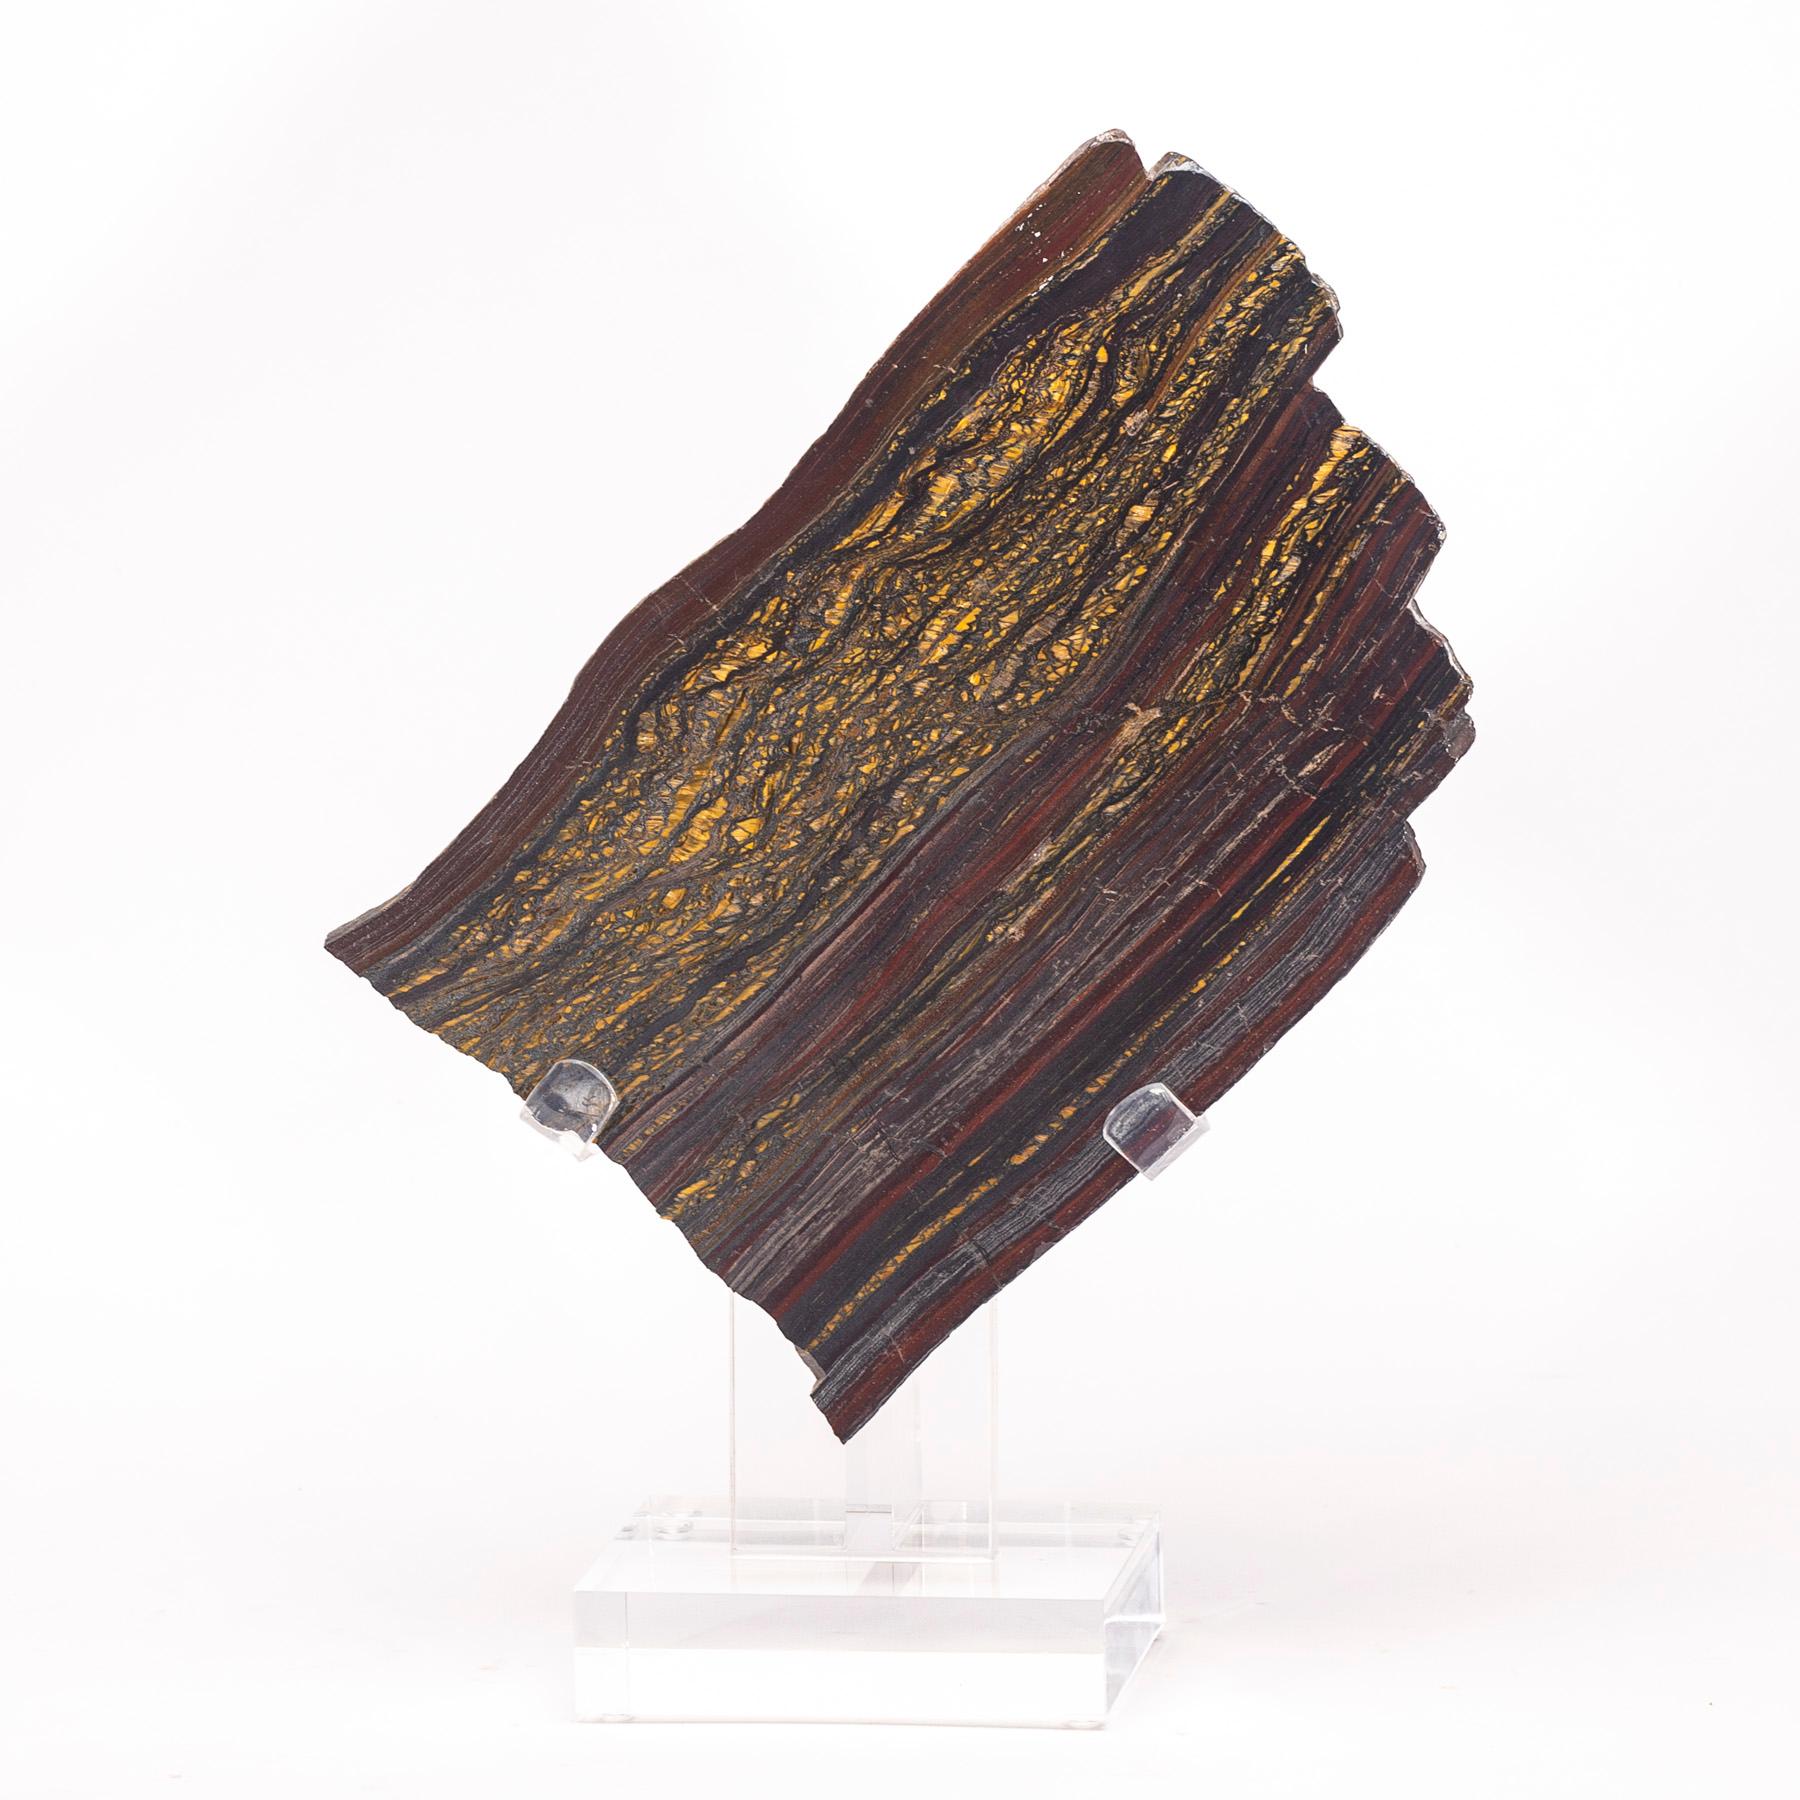 Beautiful Banded Tiger- Iron slab from South Africa

It´s a combination of Gold Tiger Eye, Hematite and Red Jasper. Its name refers to the composition of the stone, Tiger Eye and Hematite which is a stone rich in iron.
 